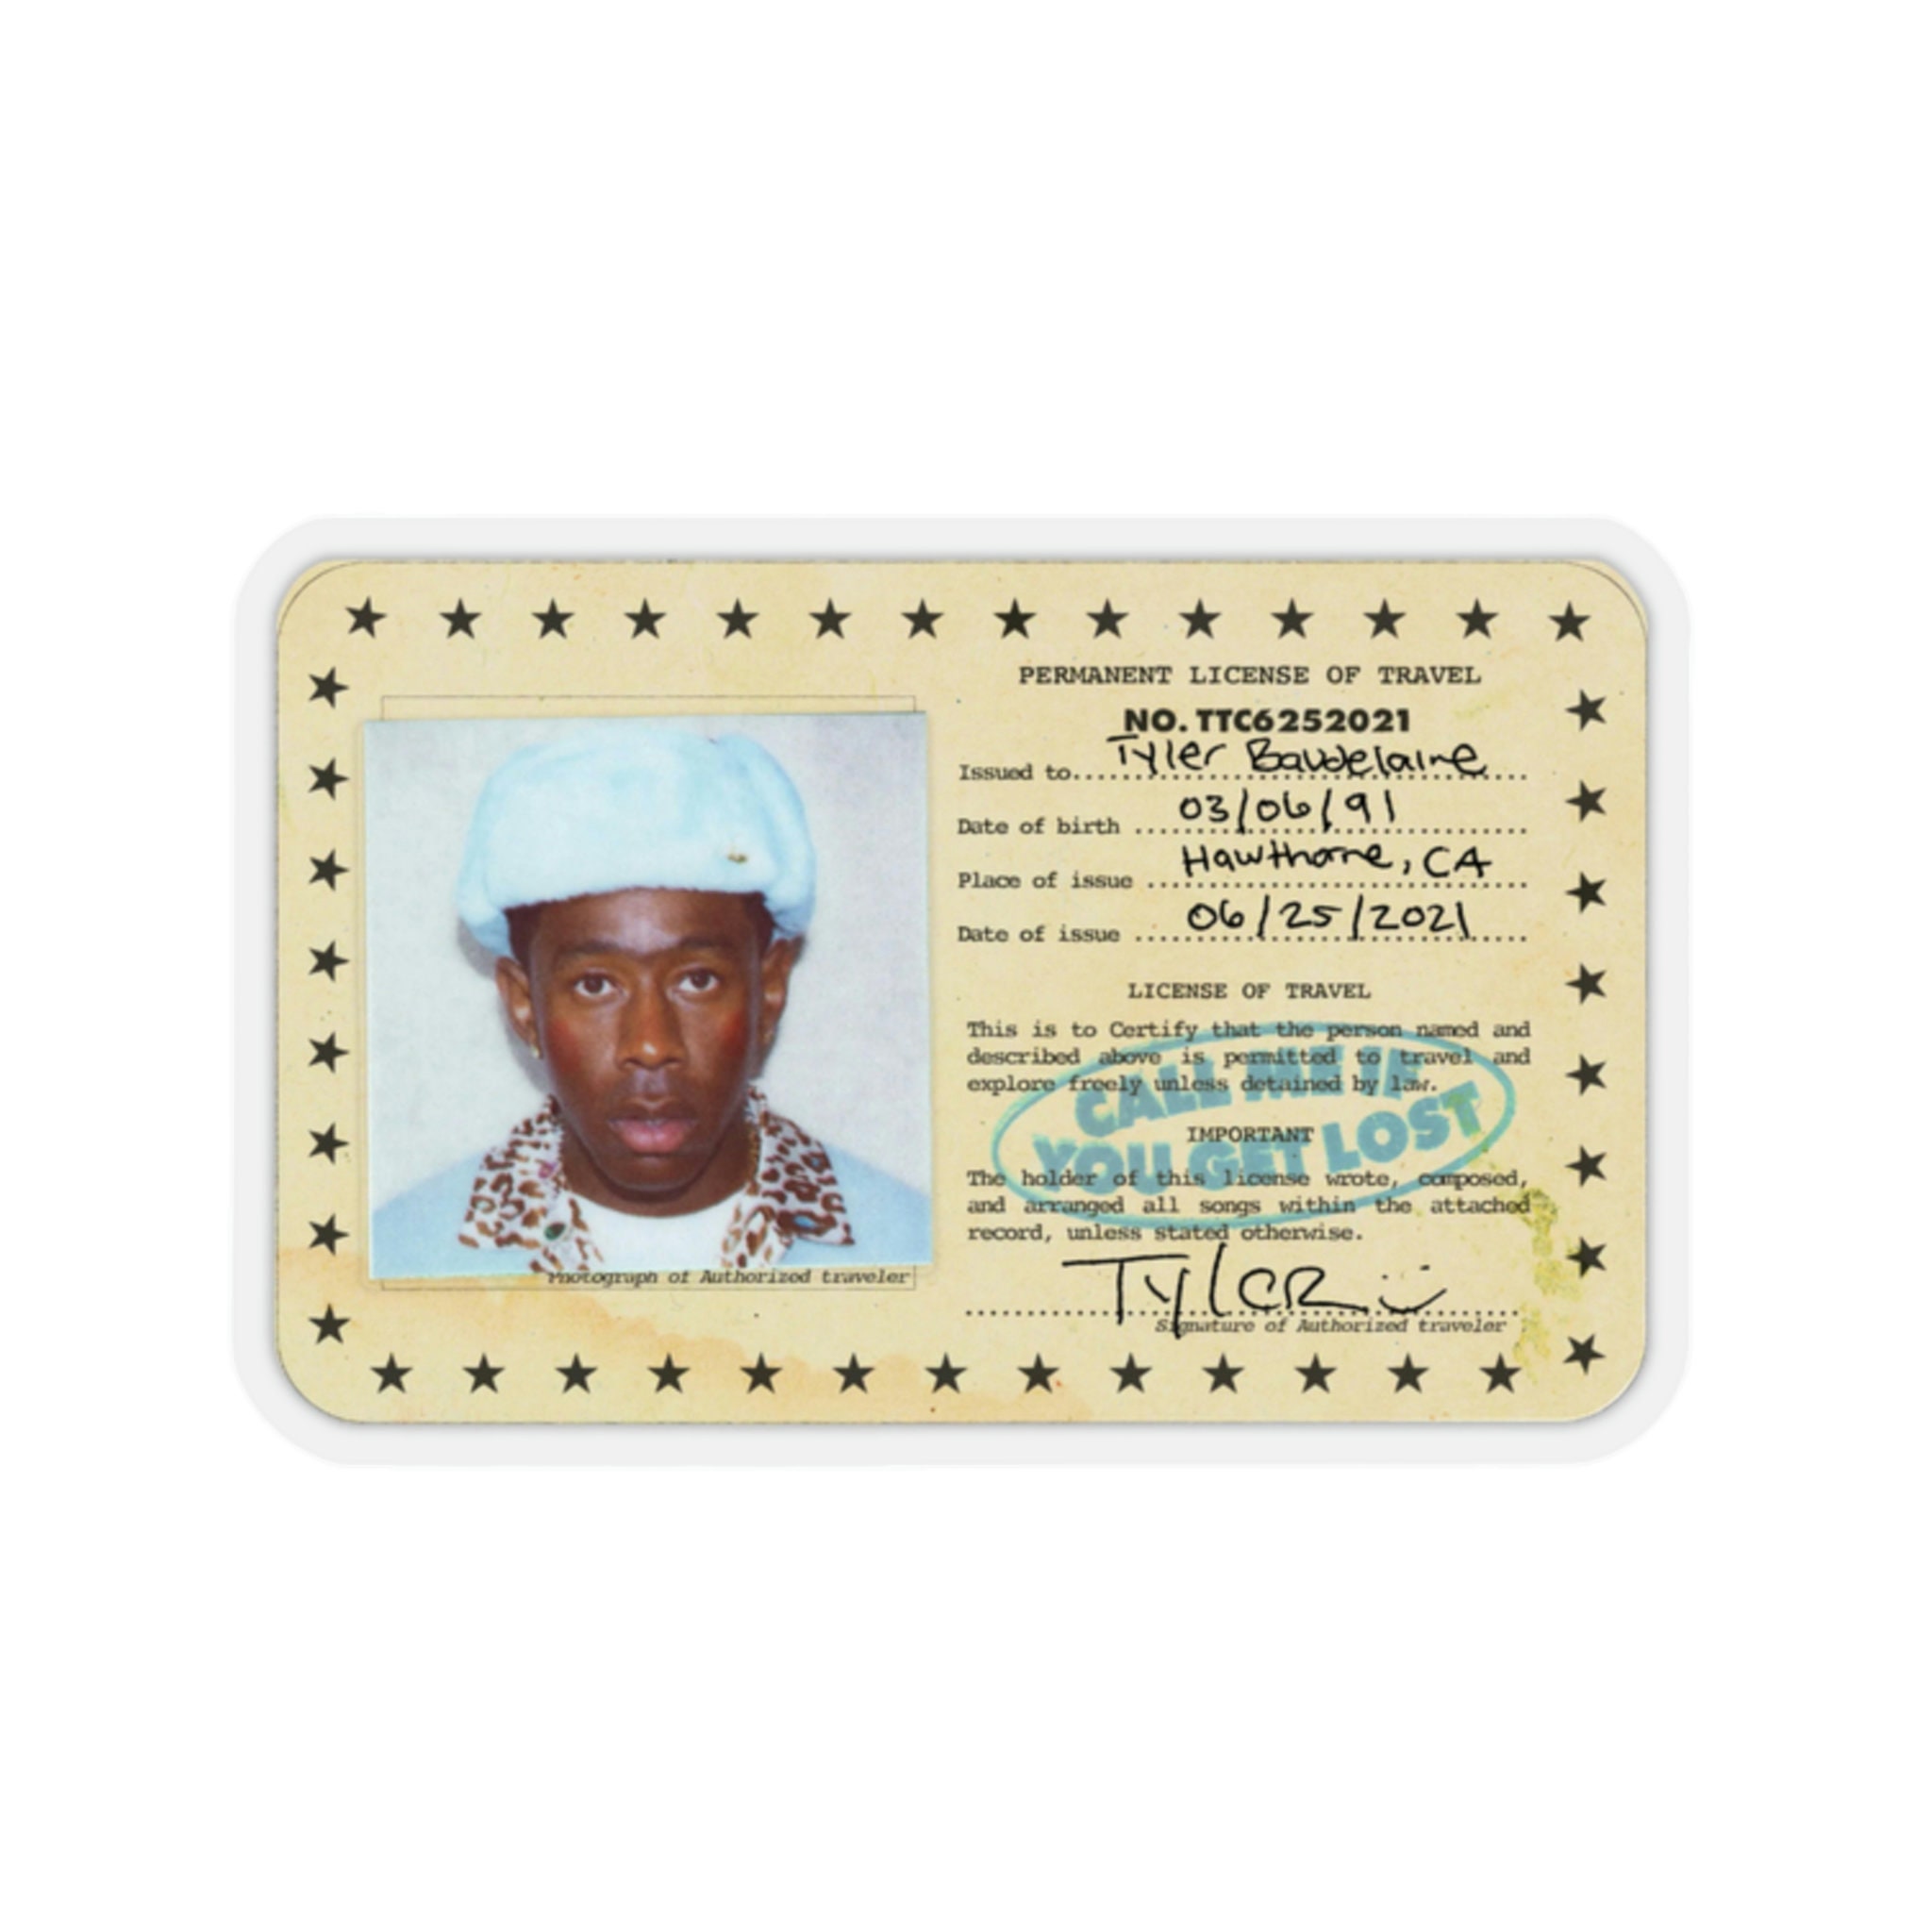 Call Me If You Get Lost, Tyler the Creator Sticker for Sale by